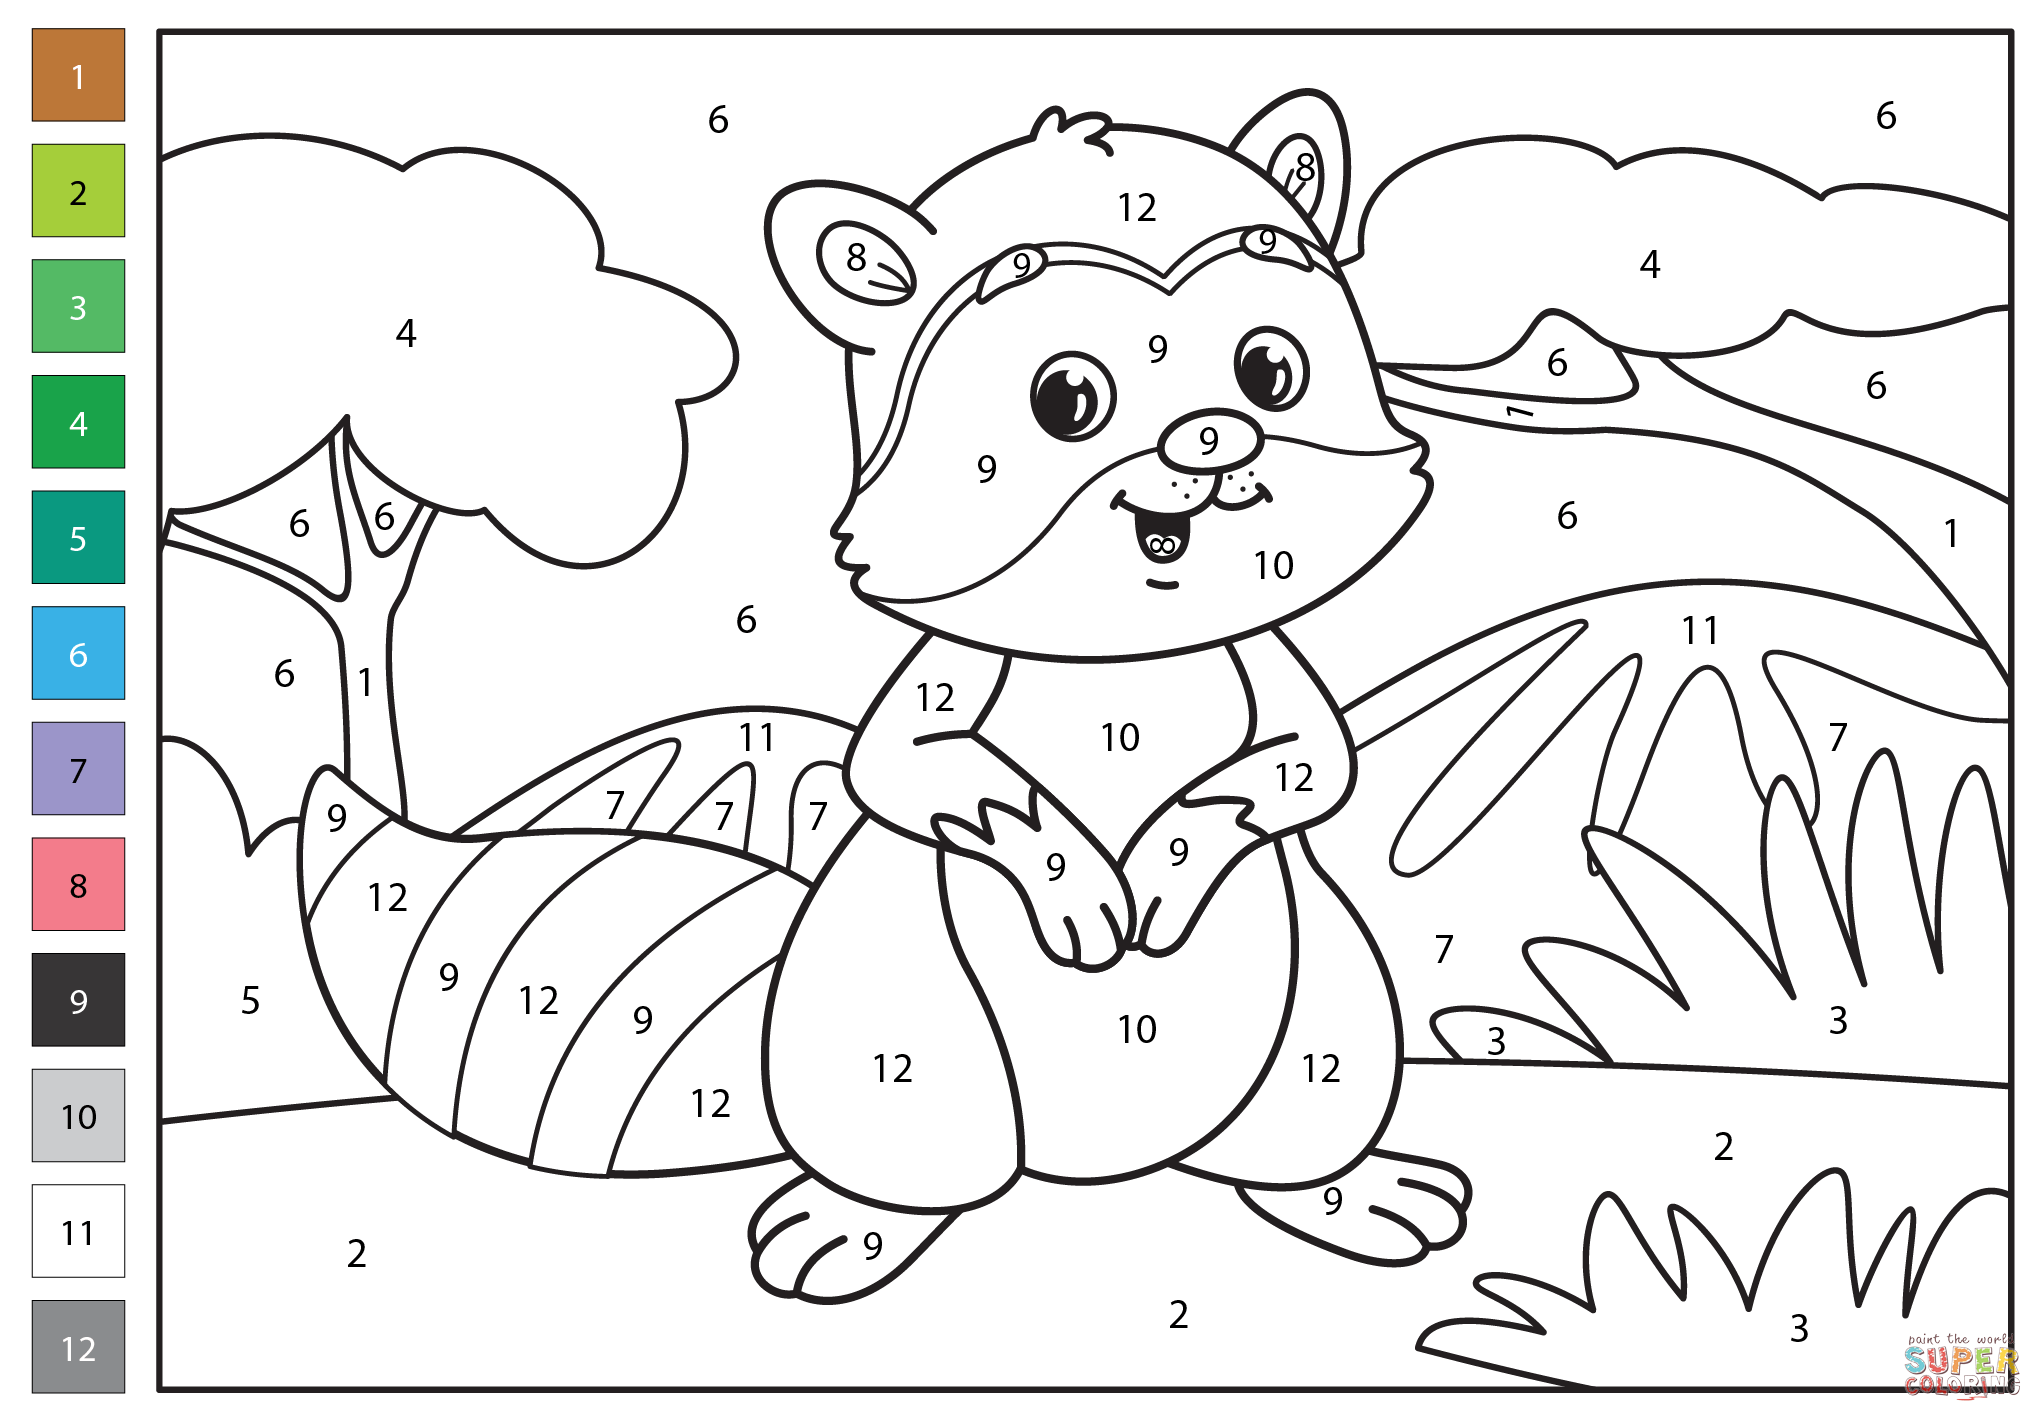 Raccoon color by number free printable coloring pages